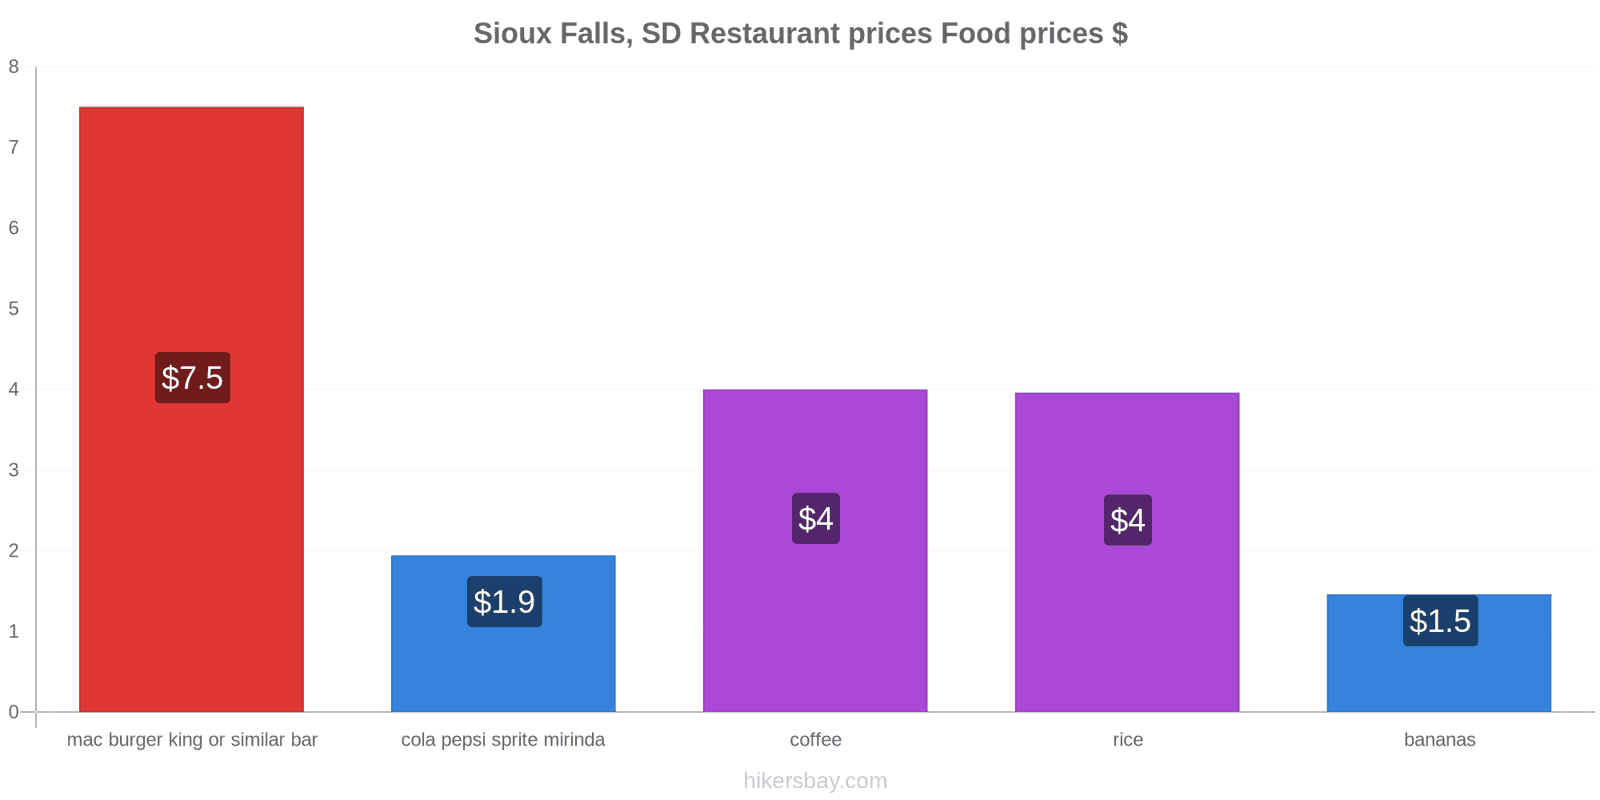 Sioux Falls, SD price changes hikersbay.com